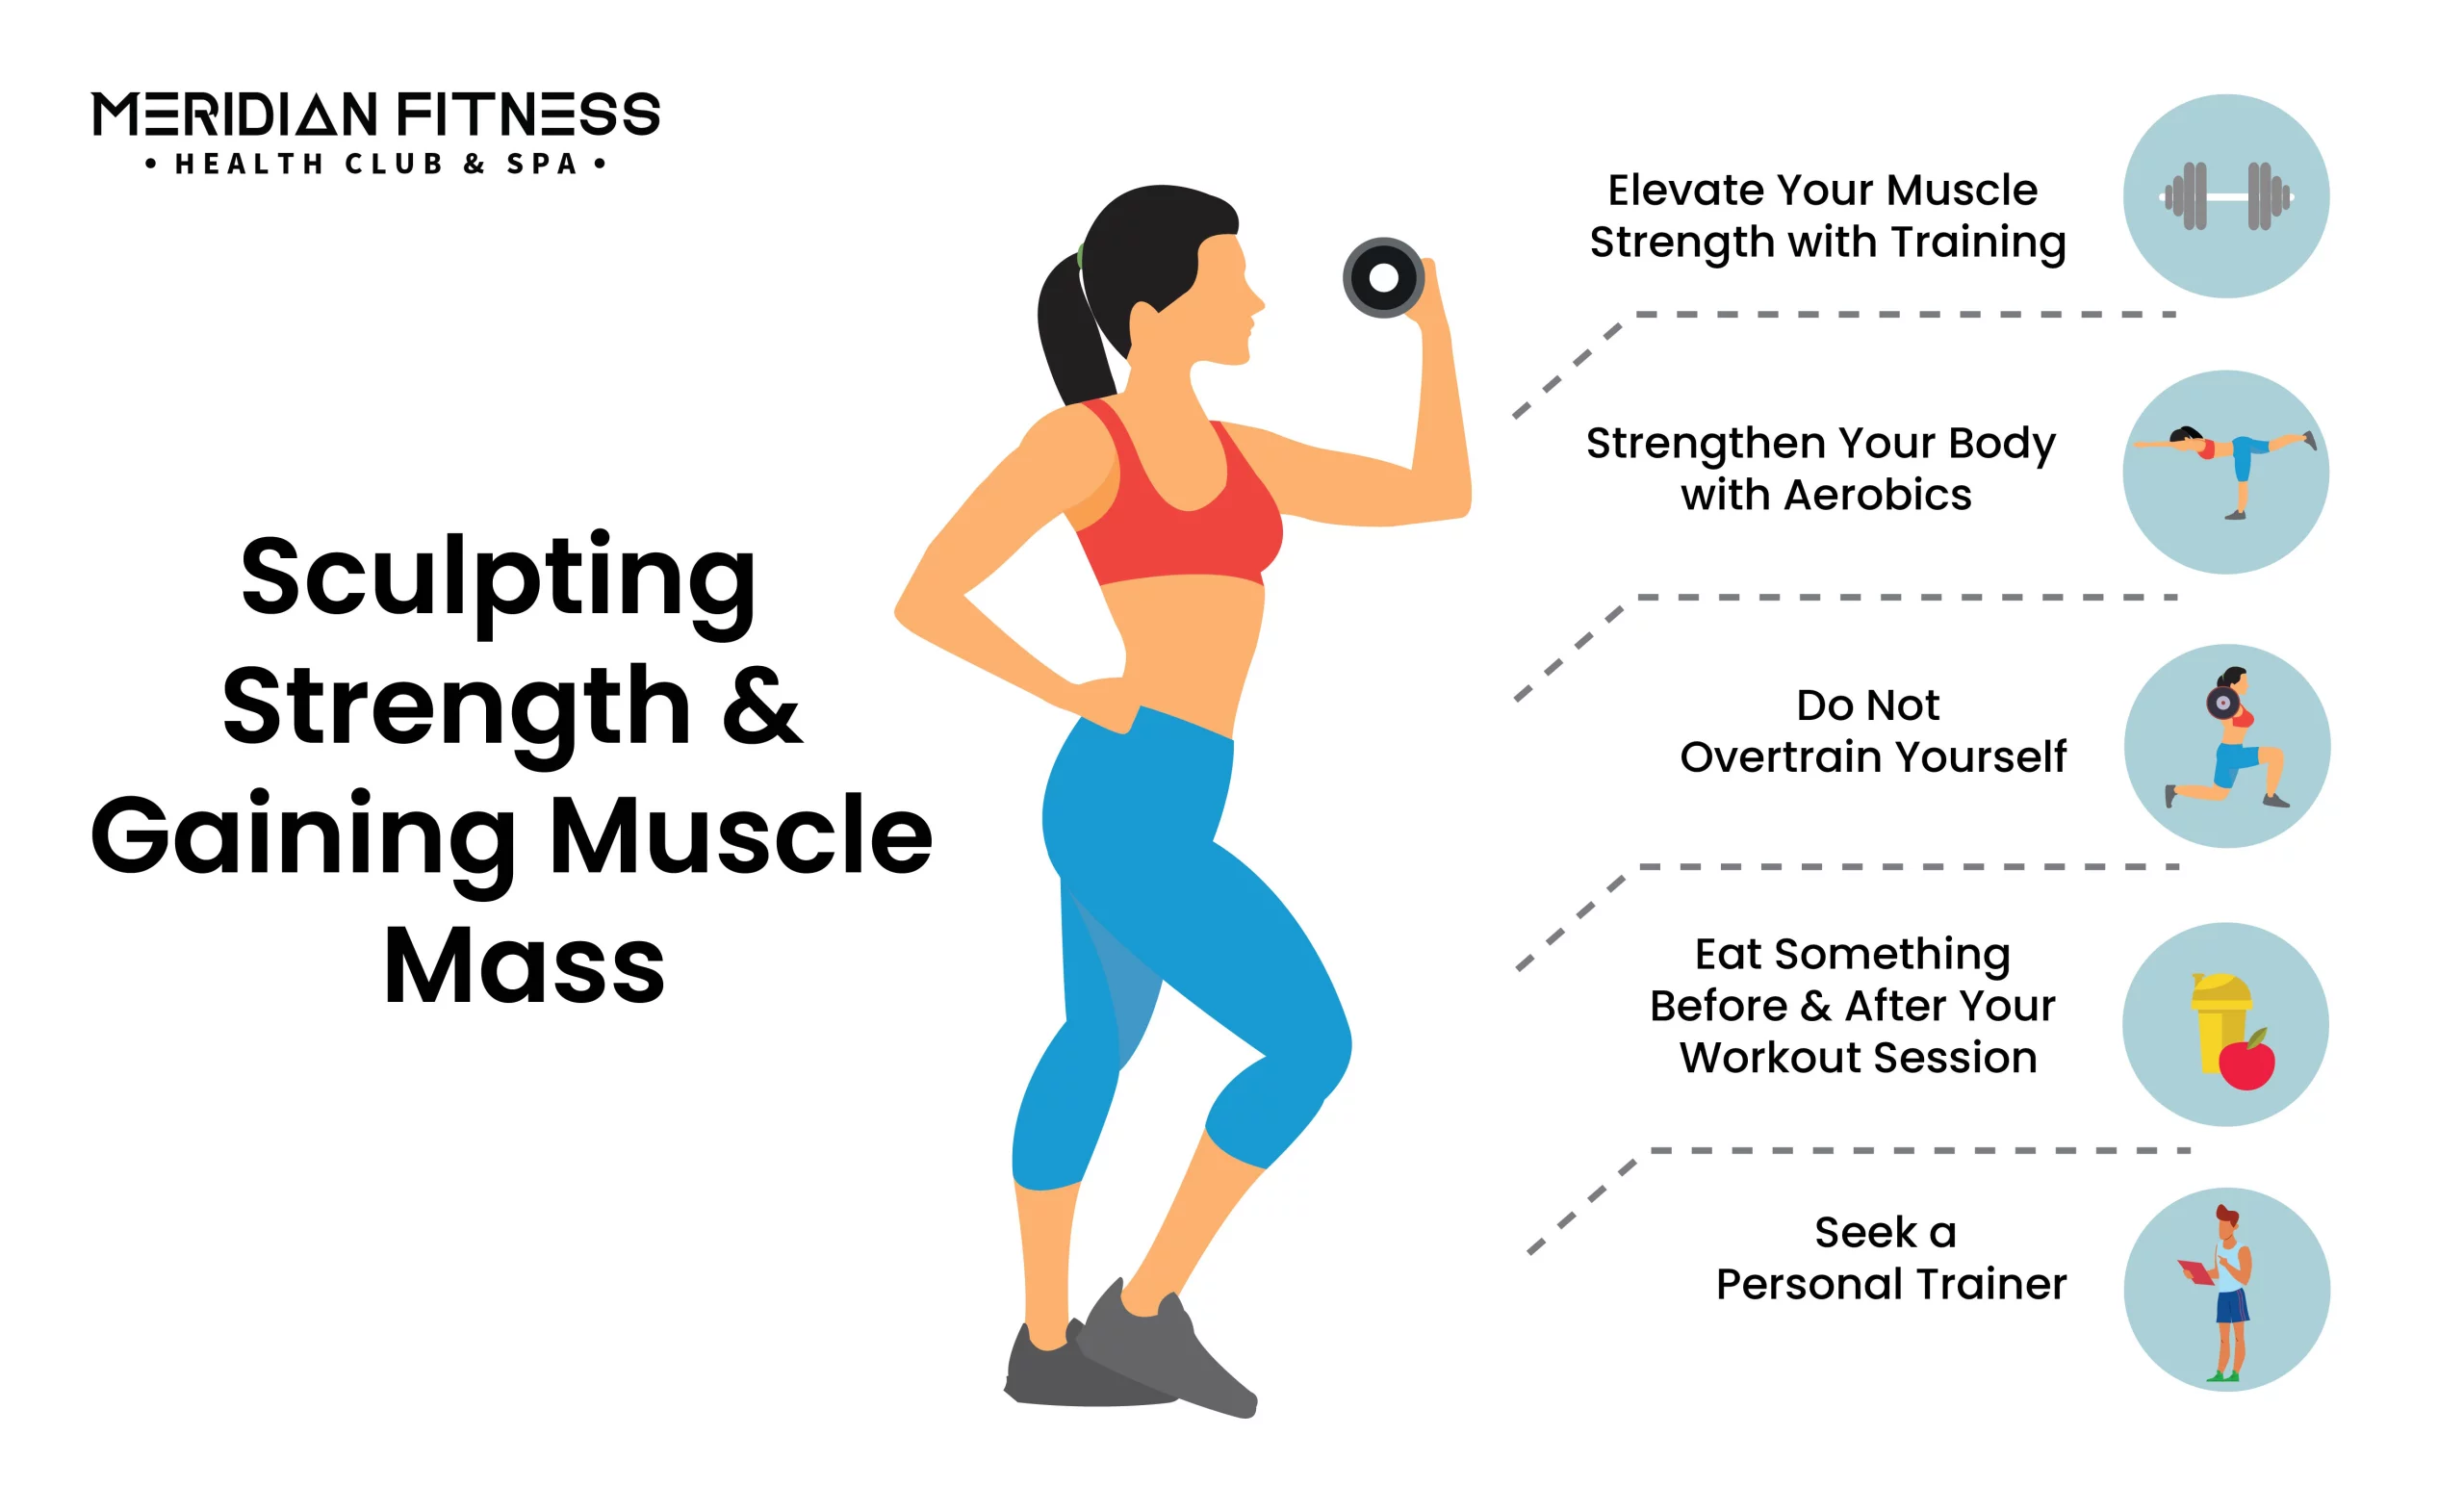 Sculpting Strength and Gaining Muscle Mass